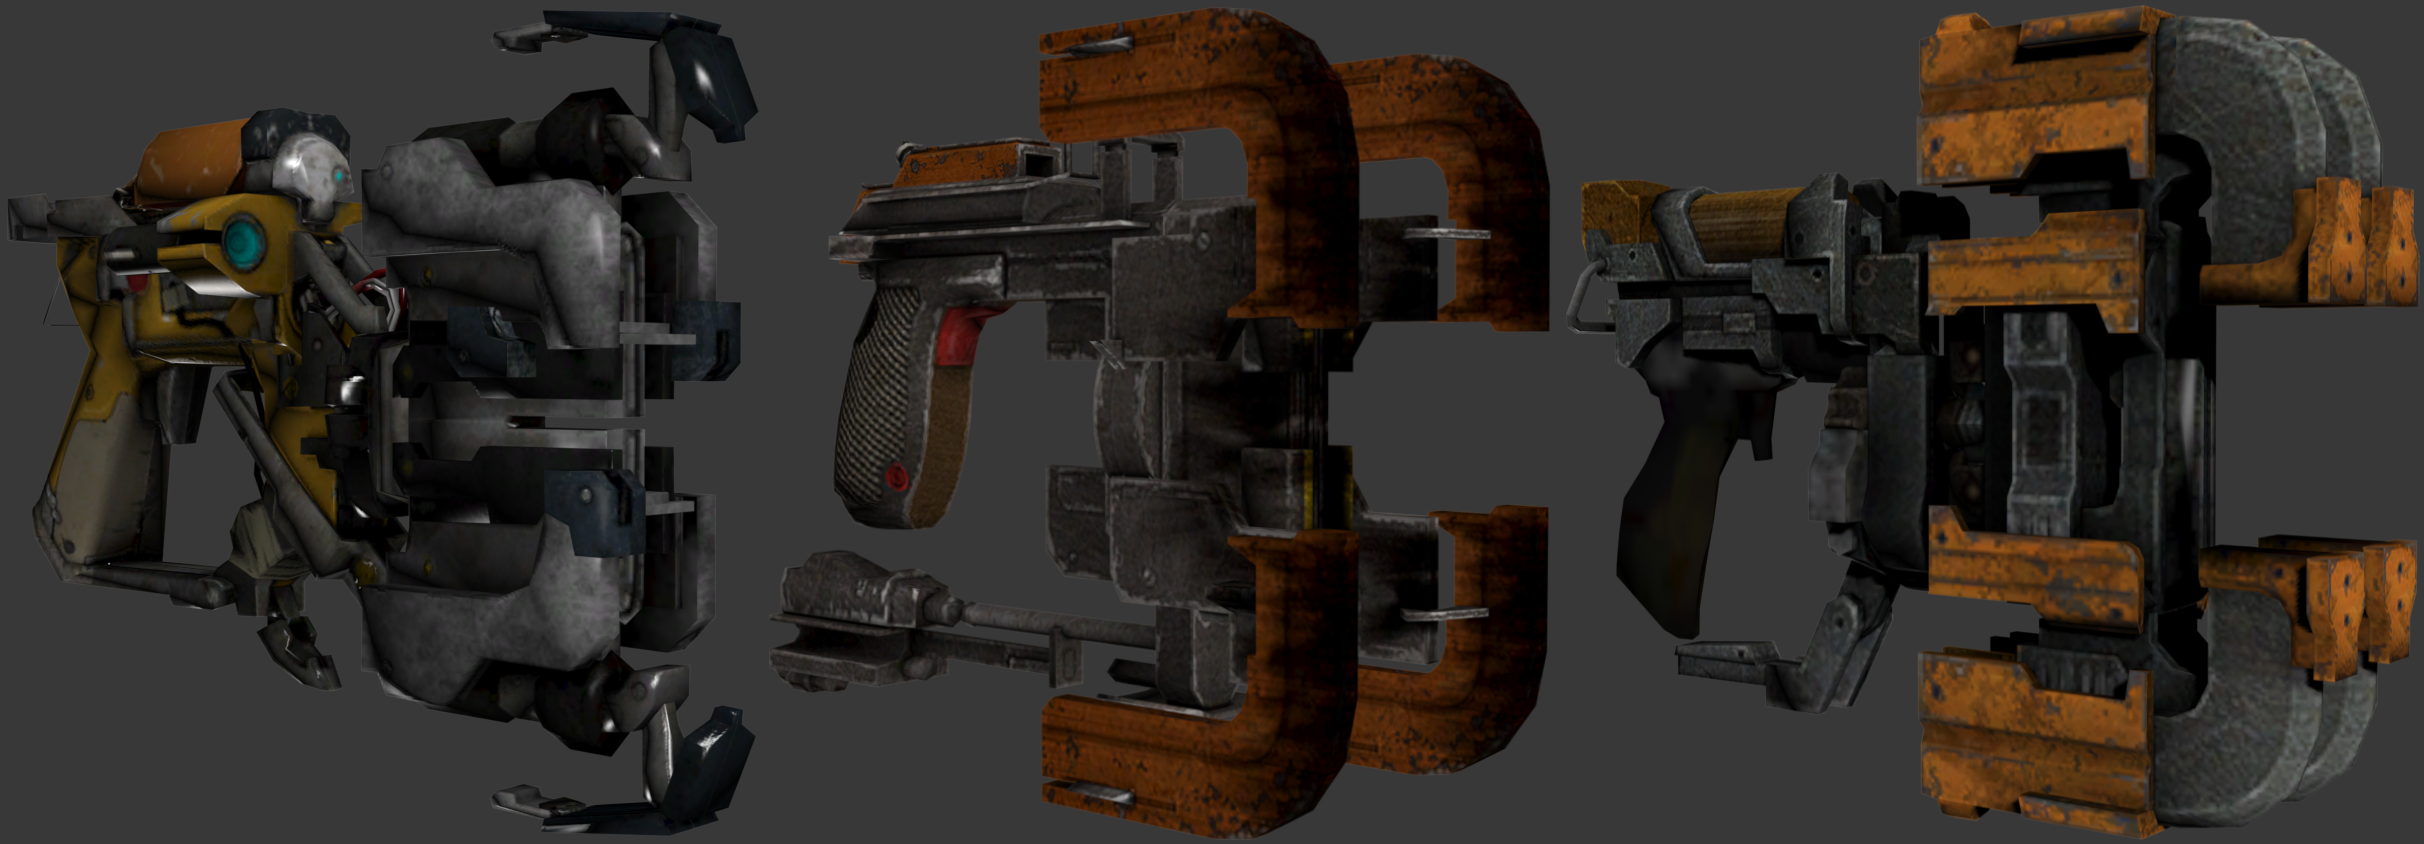 dead space weapons